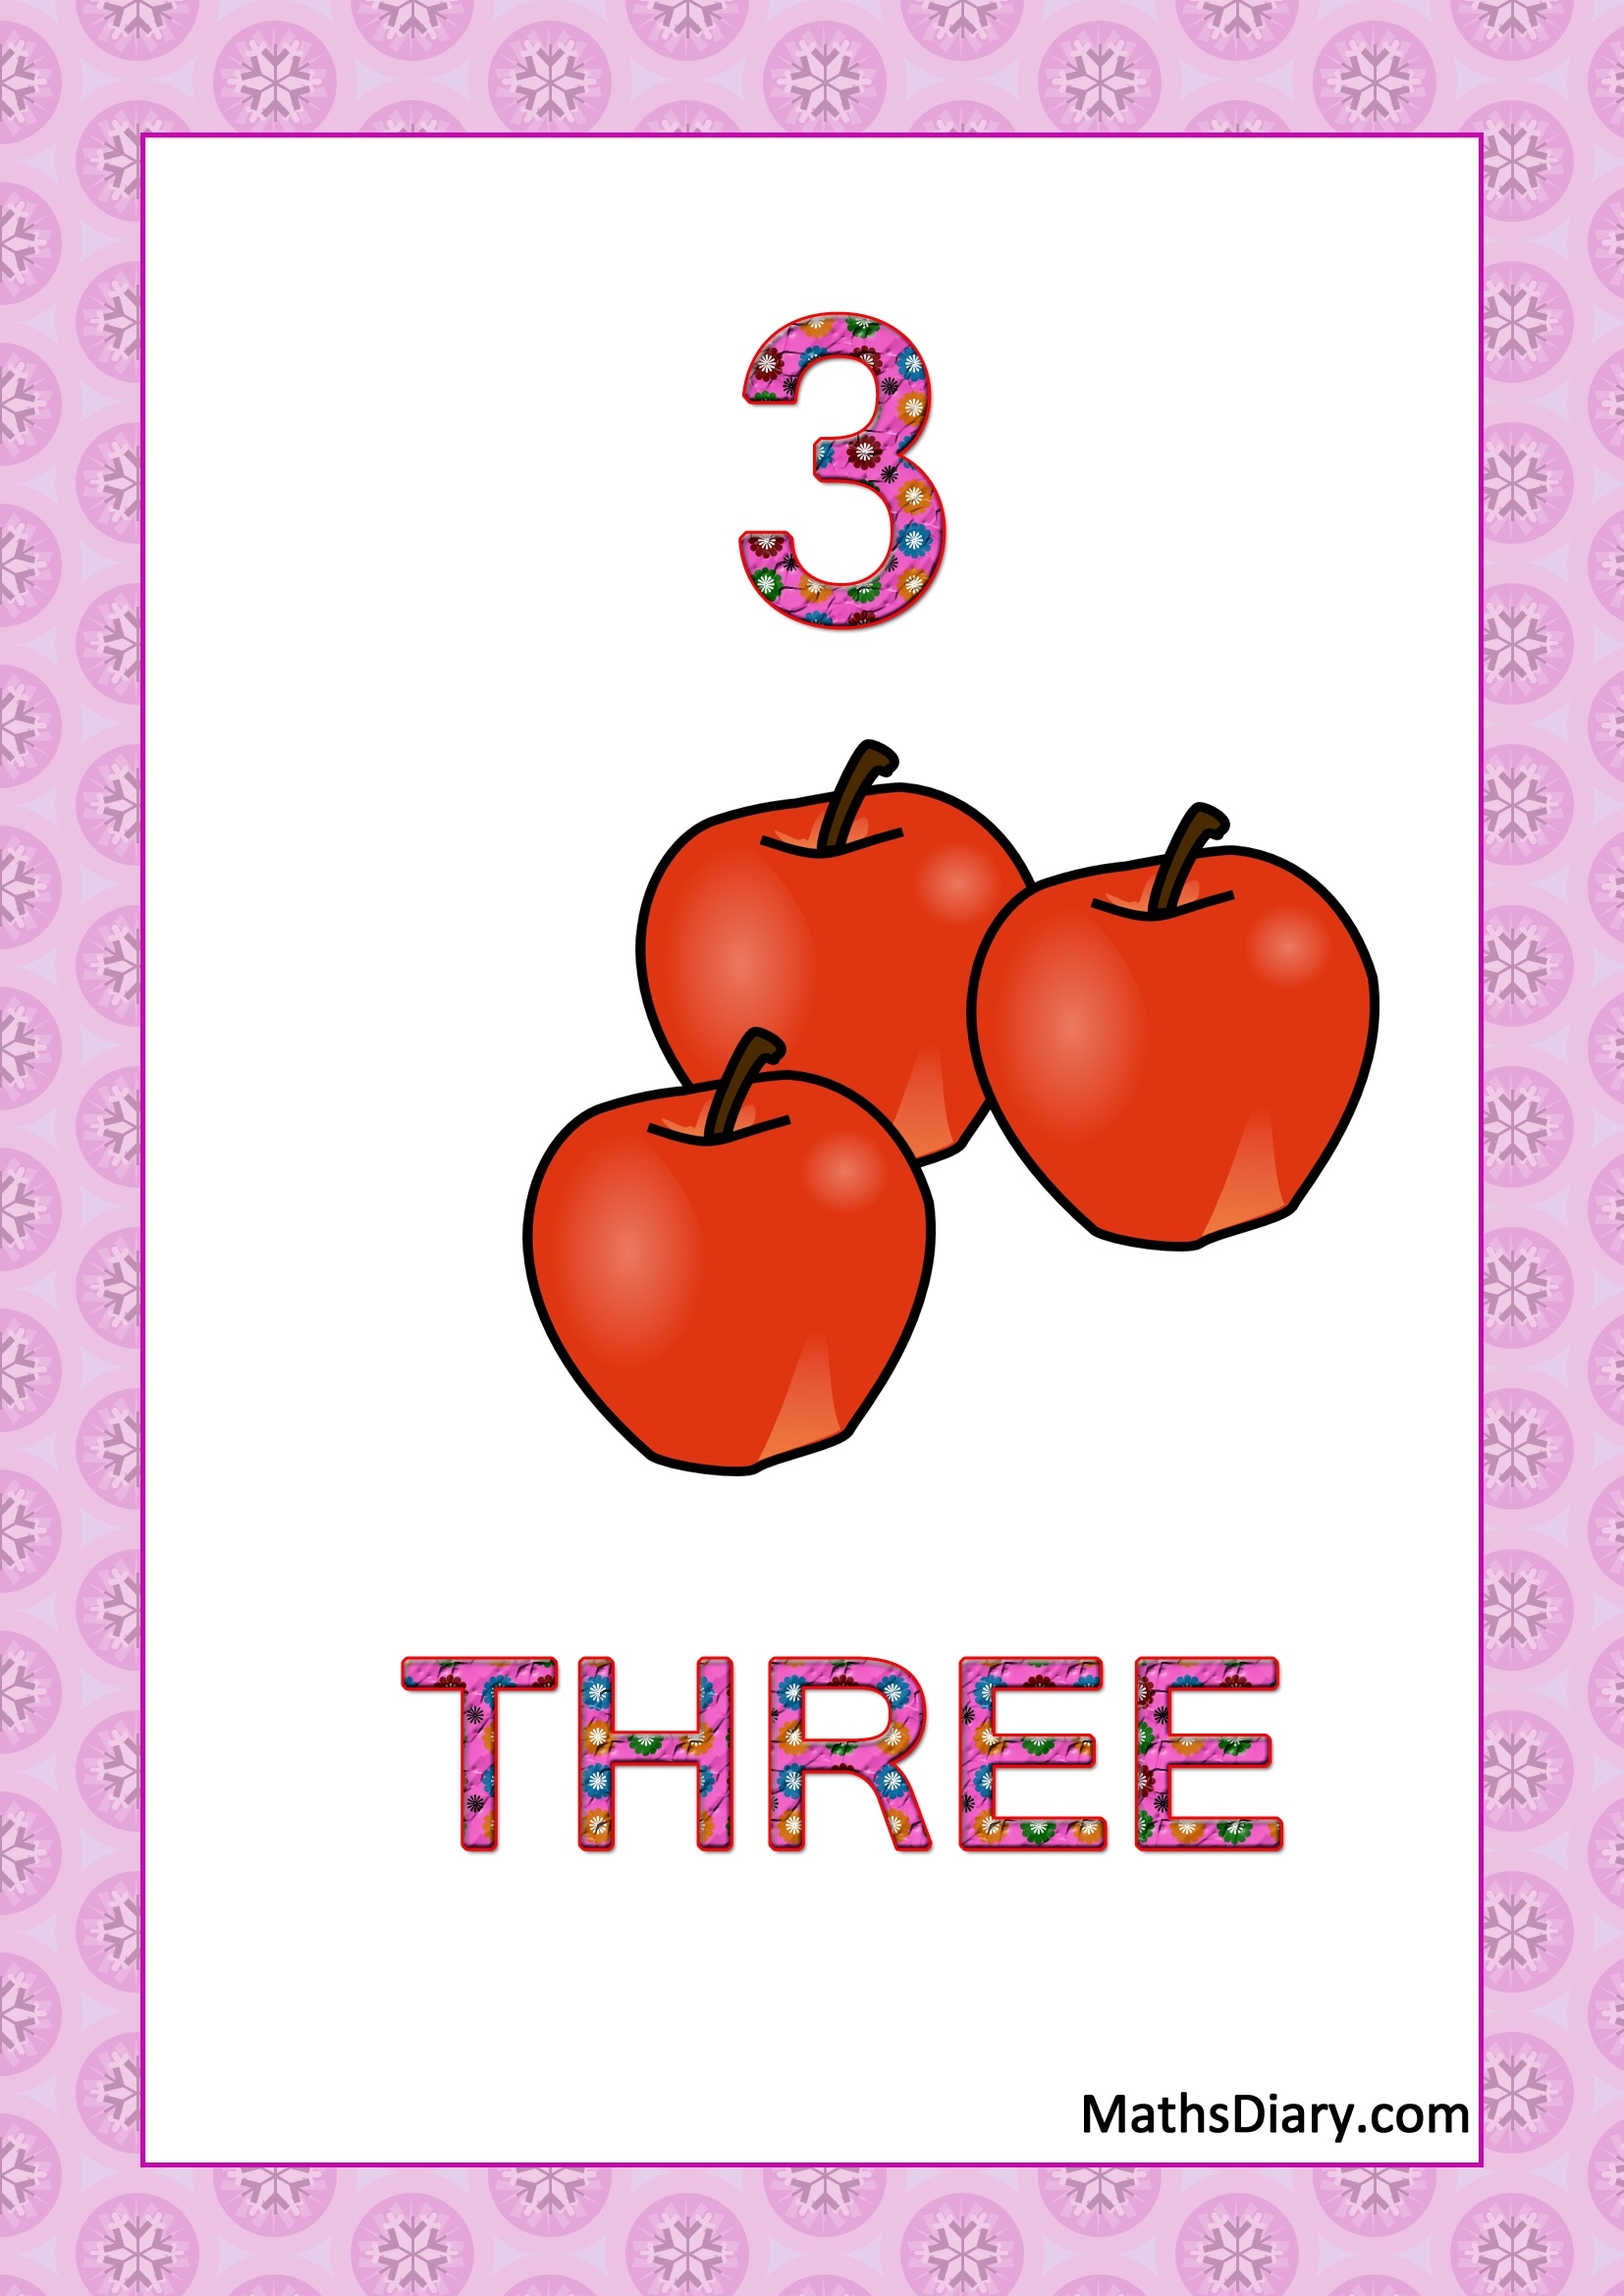 Learning Counting And Recognition Of Number 3 Worksheets Level 1 Help Sheets Part 1 Math